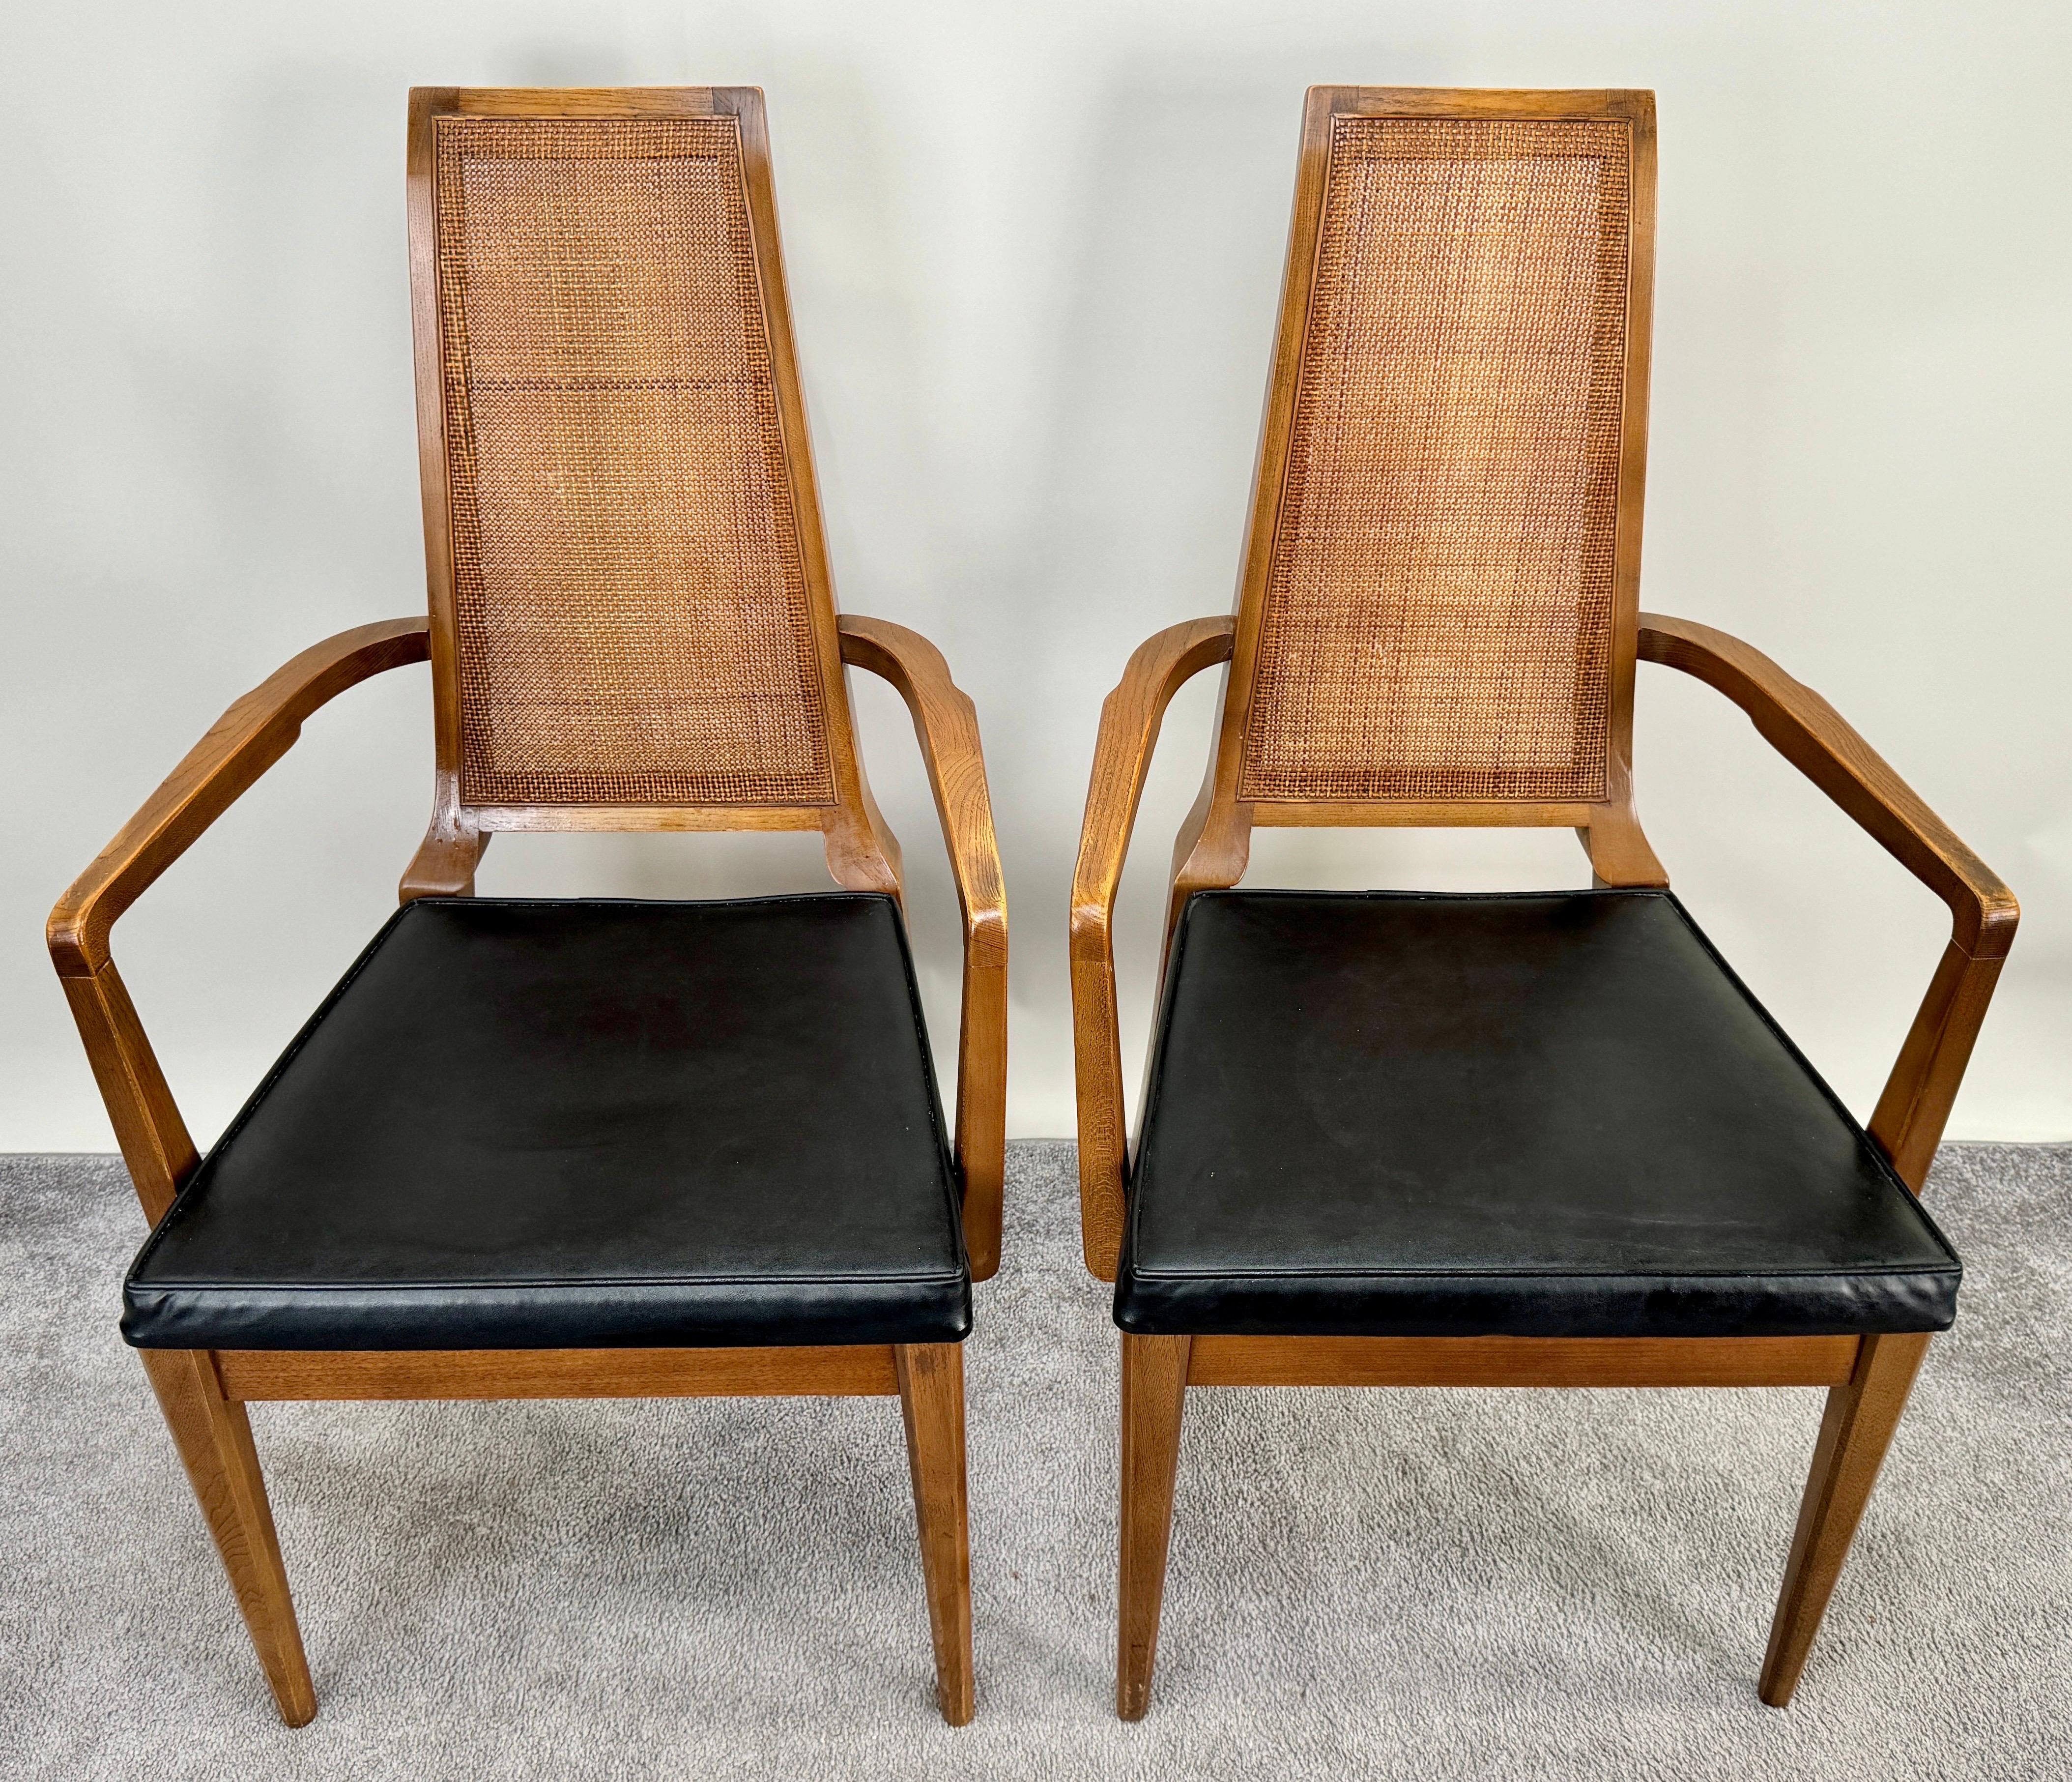 Mid Century Modern Walnut & Cane Dining Chair by American of Martinsville, 6 pcs For Sale 5